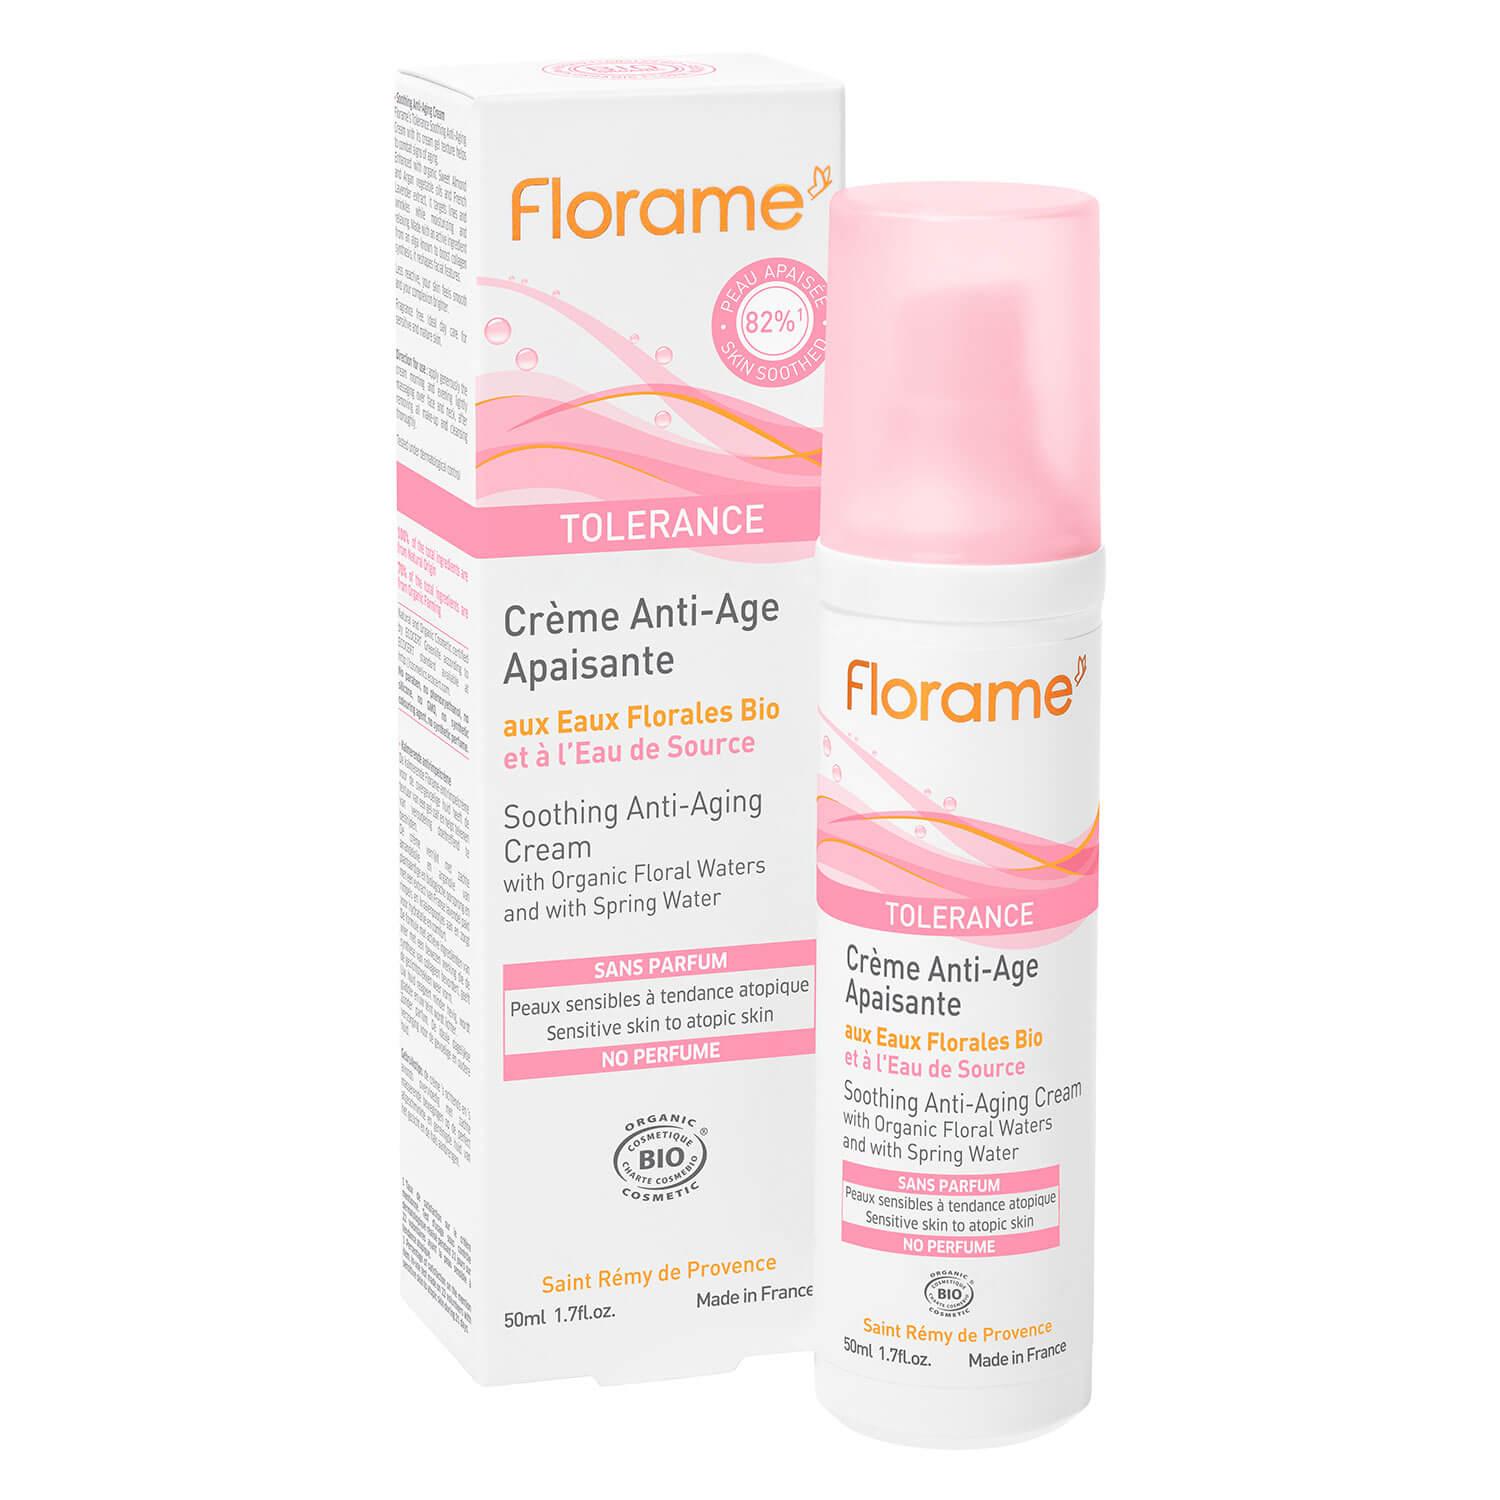 Florame - Tolerance Soothing Anti-Aging Cream